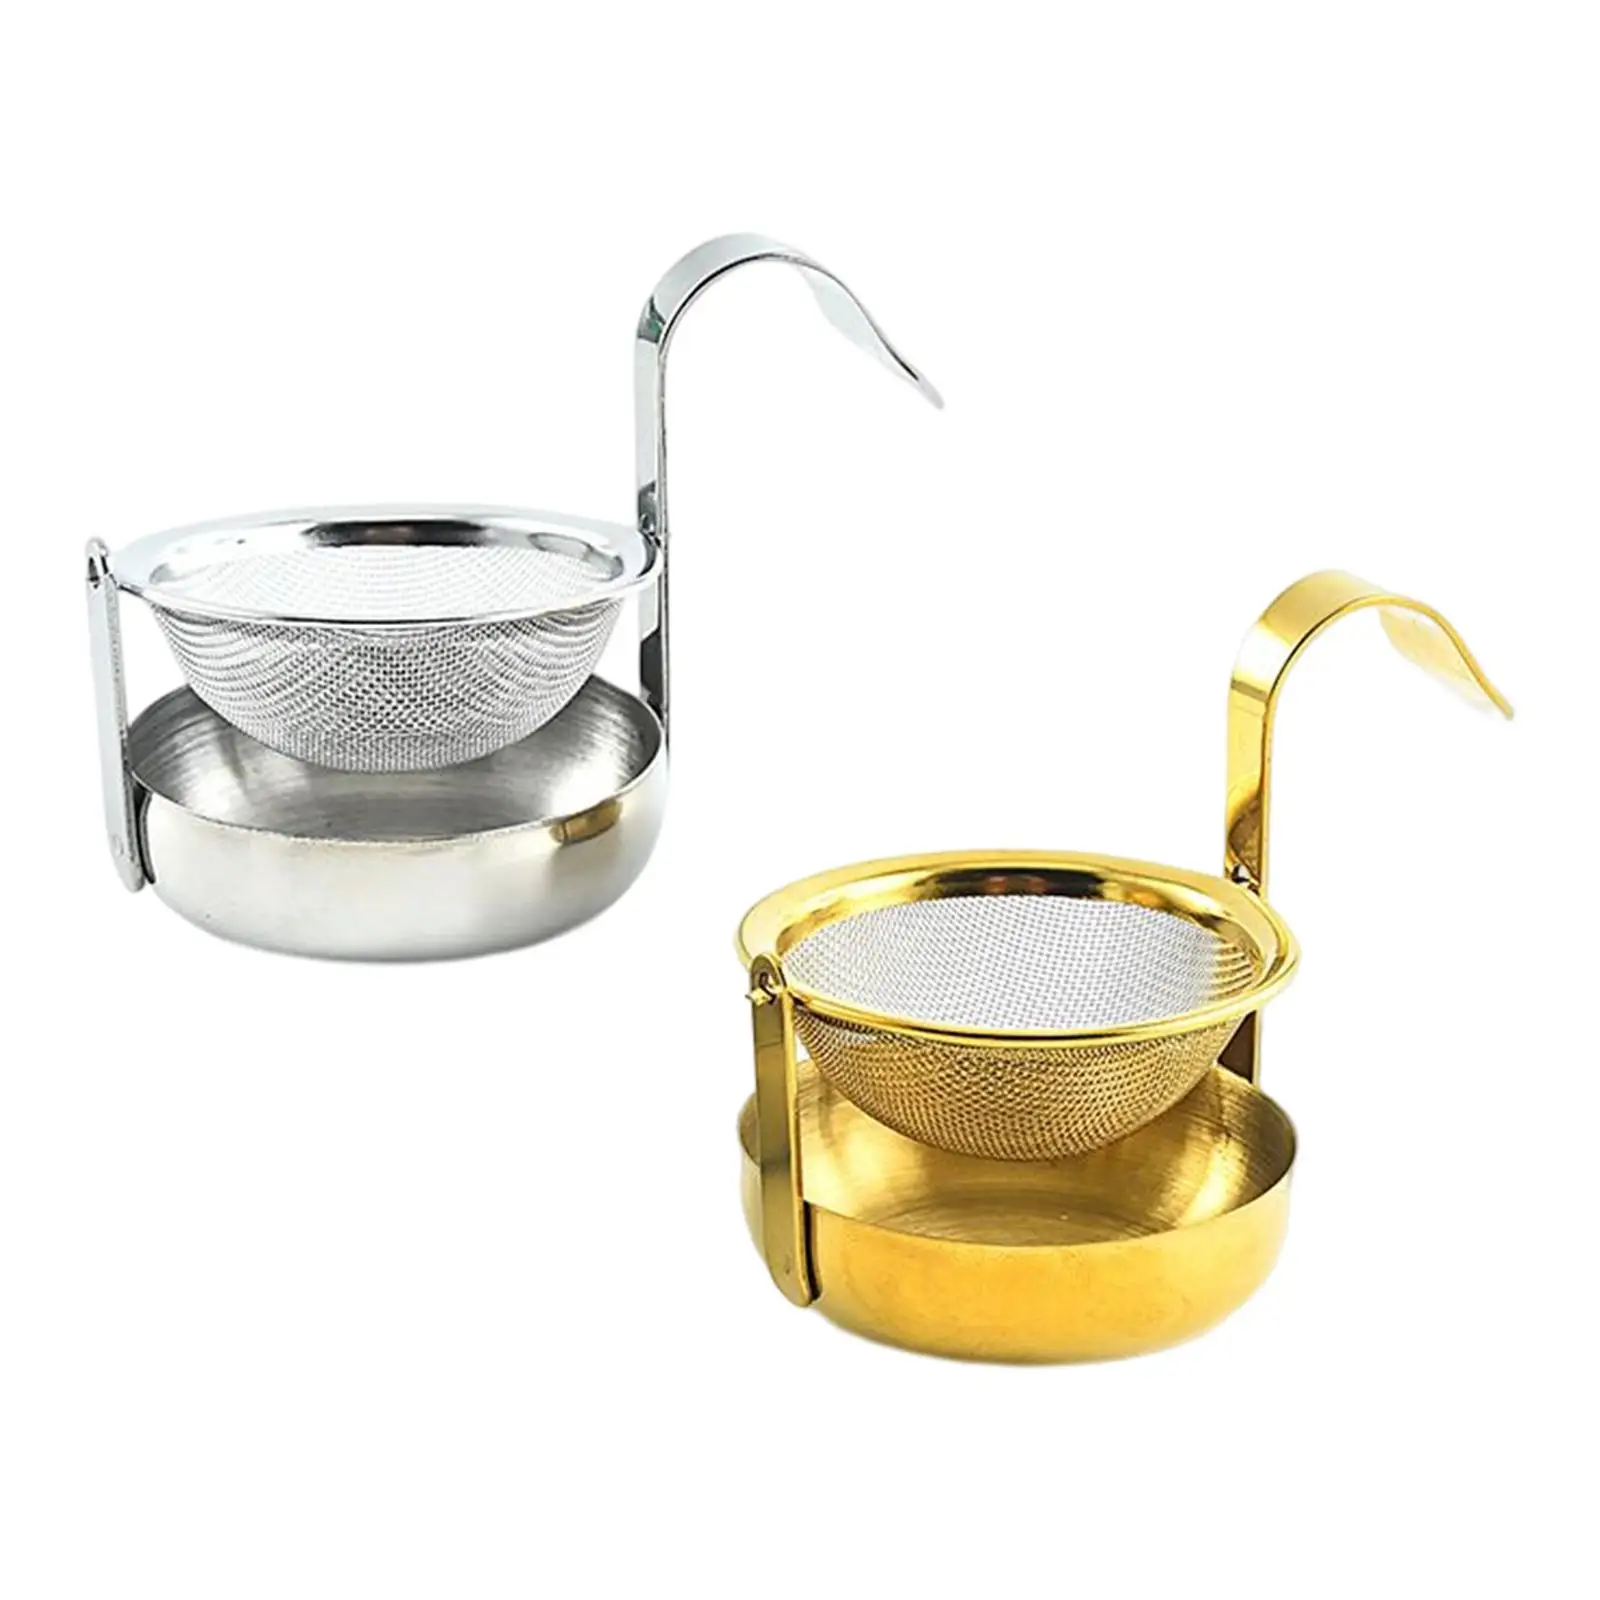 360 Rotatable Tea Strainer with Handle Portable 304 Stainless Steel Tea Accessories Reusable Teaware for Party Cafe kitchen